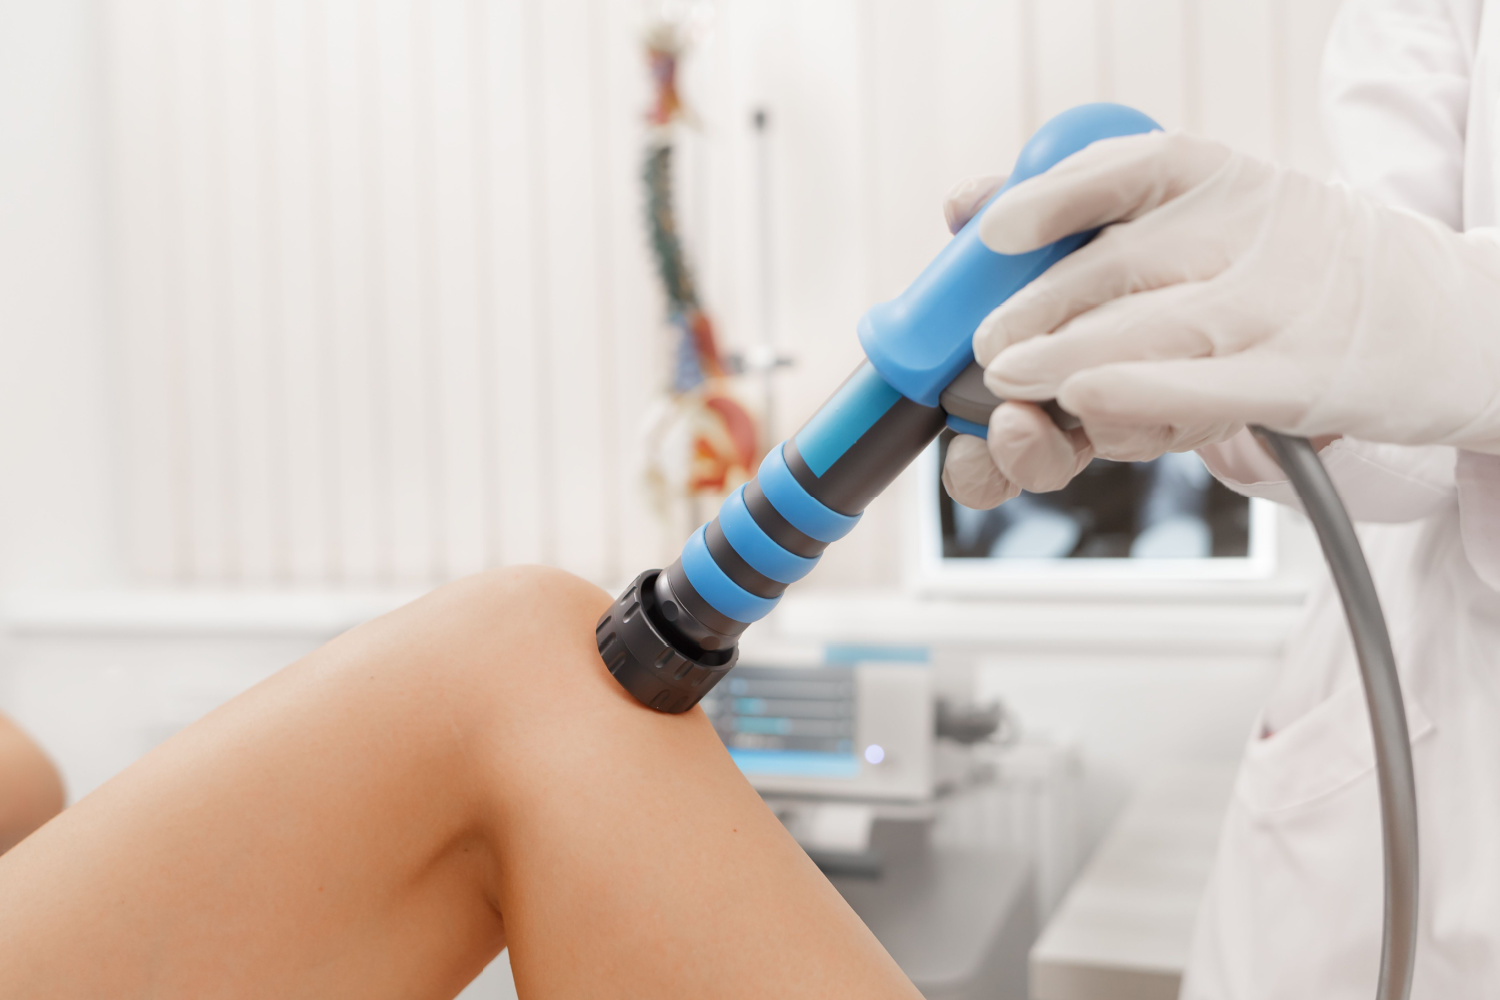 What is shockwave therapy?